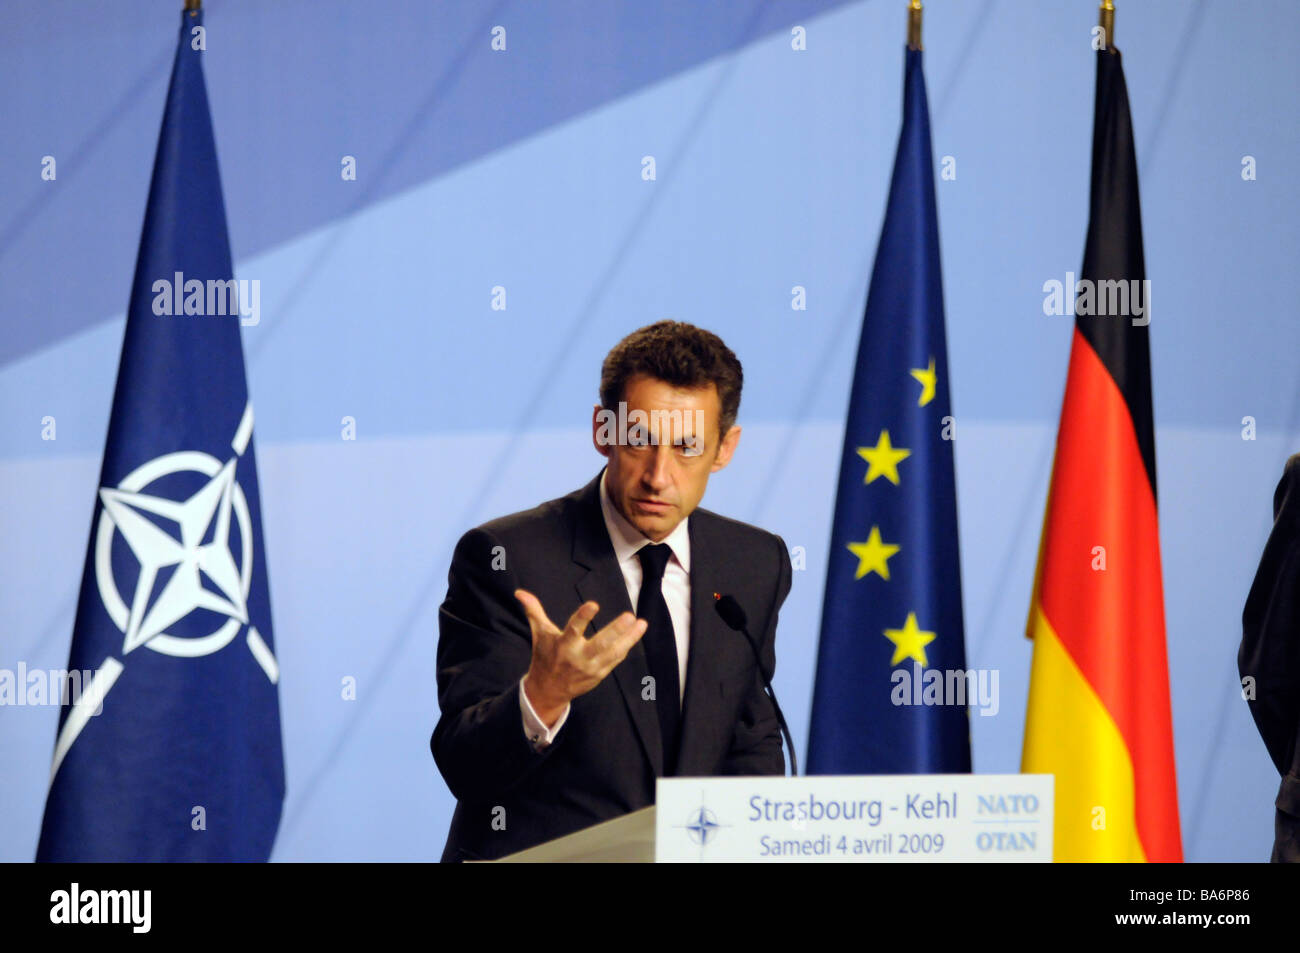 French president Nicolas Sarkozy addressing a press conference during a NATO summit in Strasbourg, France. Stock Photo